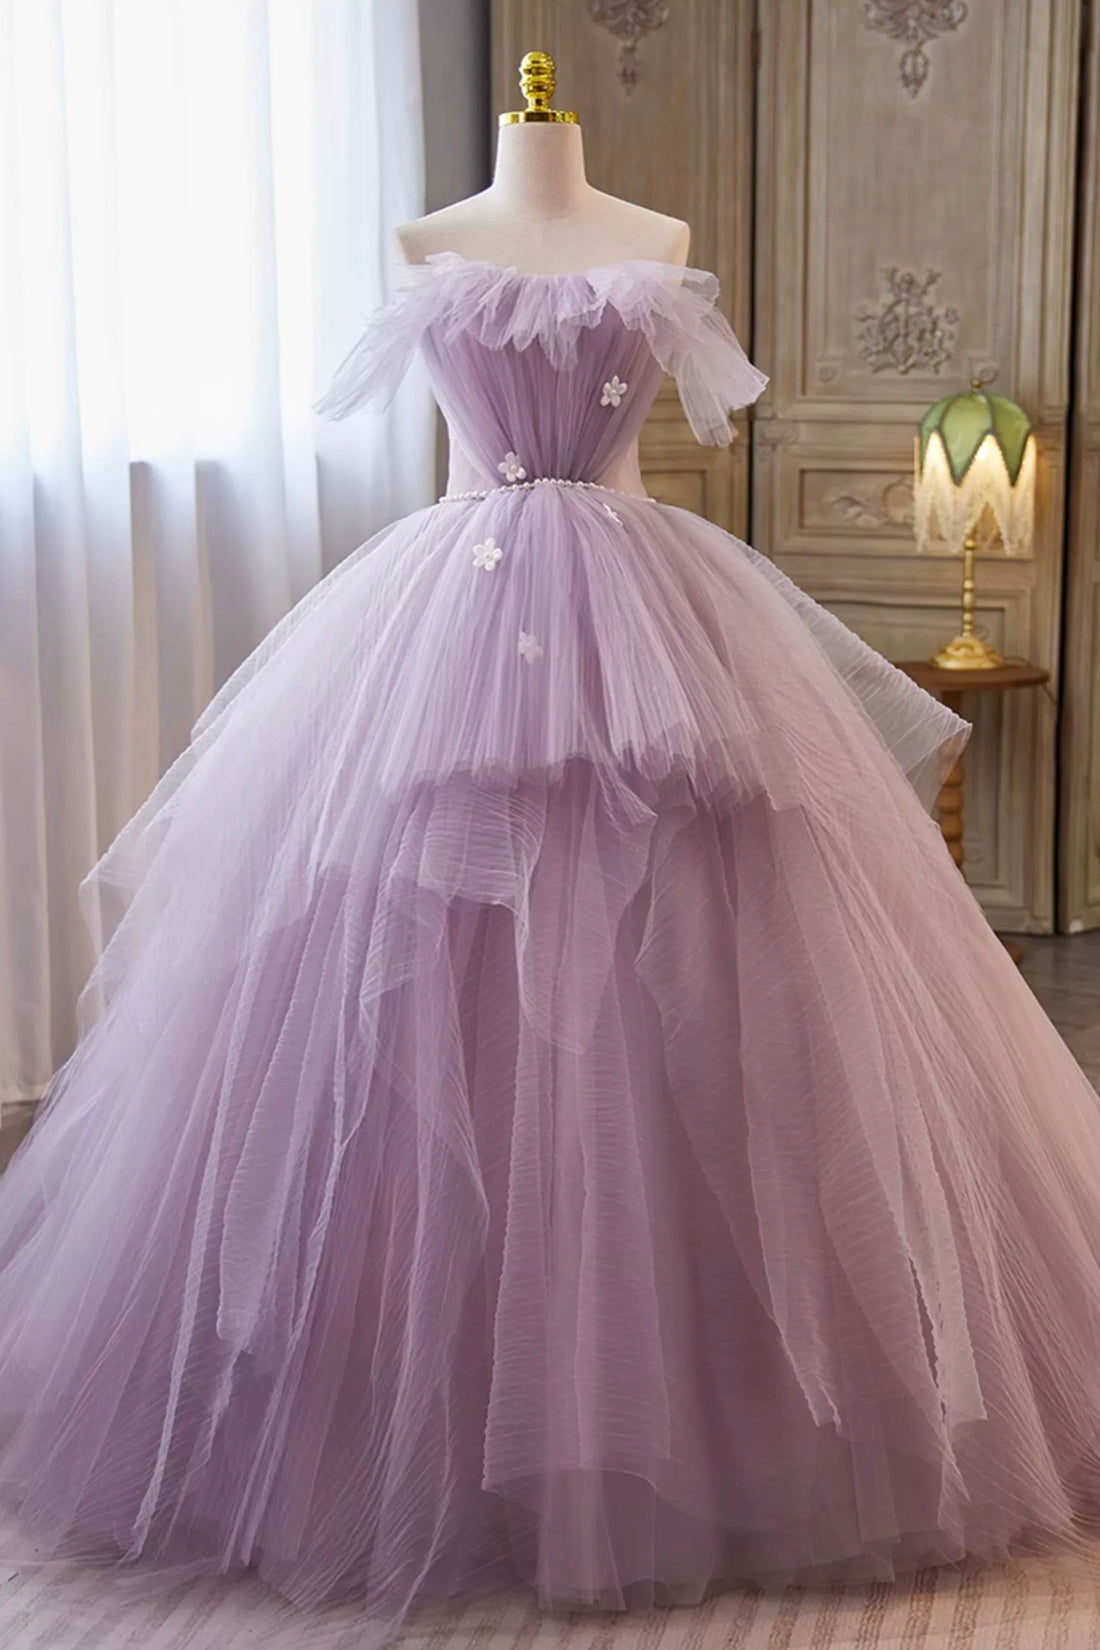 Lilac Strapless Tulle Long Prom Dresses with Pearls Belt, Lilac Off the Shoulder Formal Evening Dresses